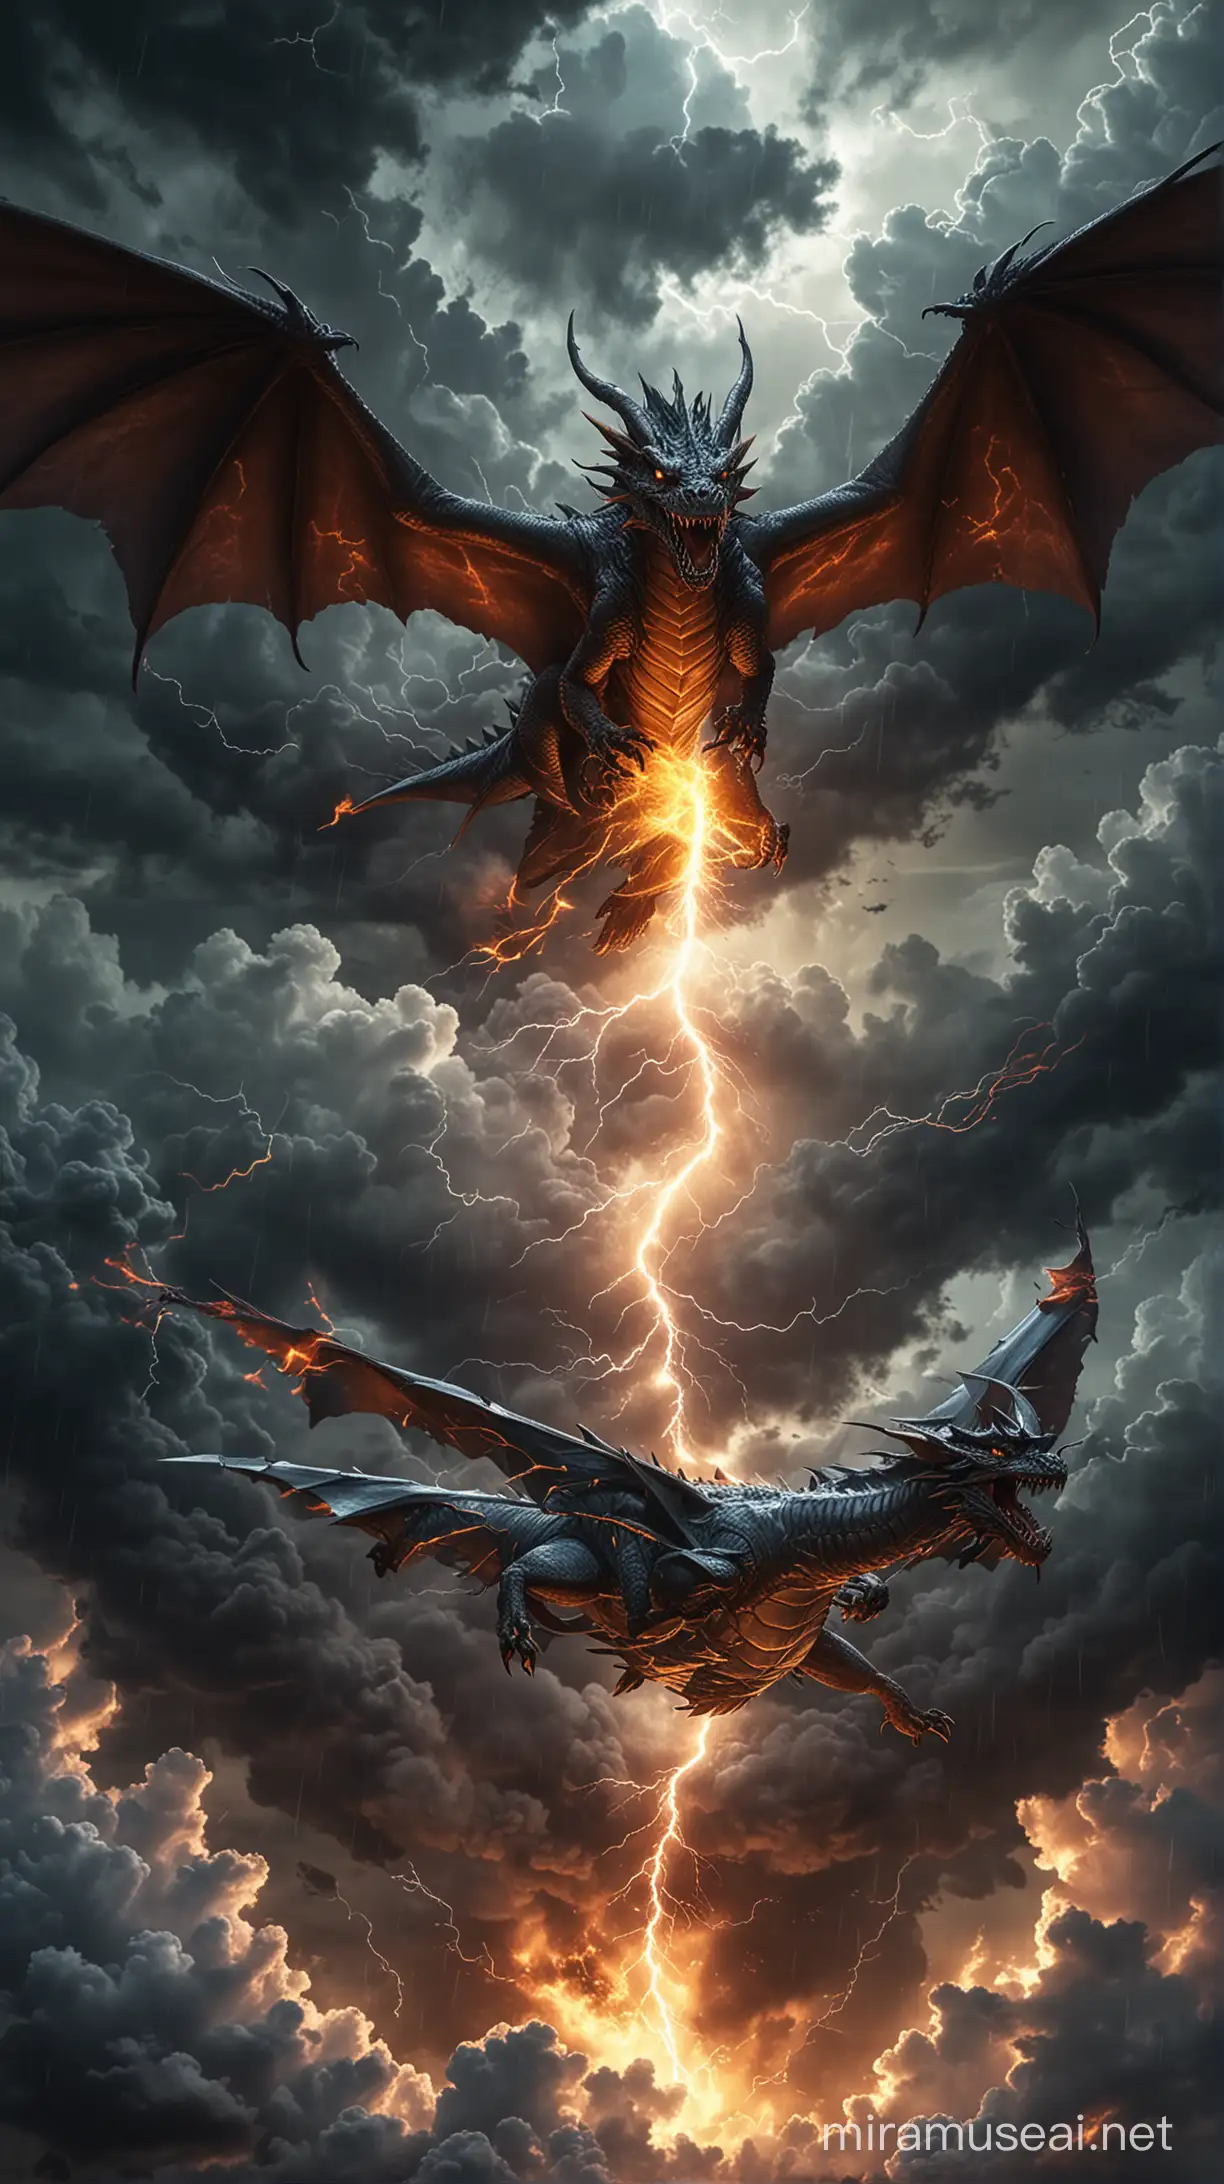 Digital Art, A stormy sky with lightning illuminating dark clouds, setting a dramatic atmosphere.A majestic dragon with the body of an aircraft, wings stretched wide and flames bursting from its mouth.Epic, powerful, and dynamic.